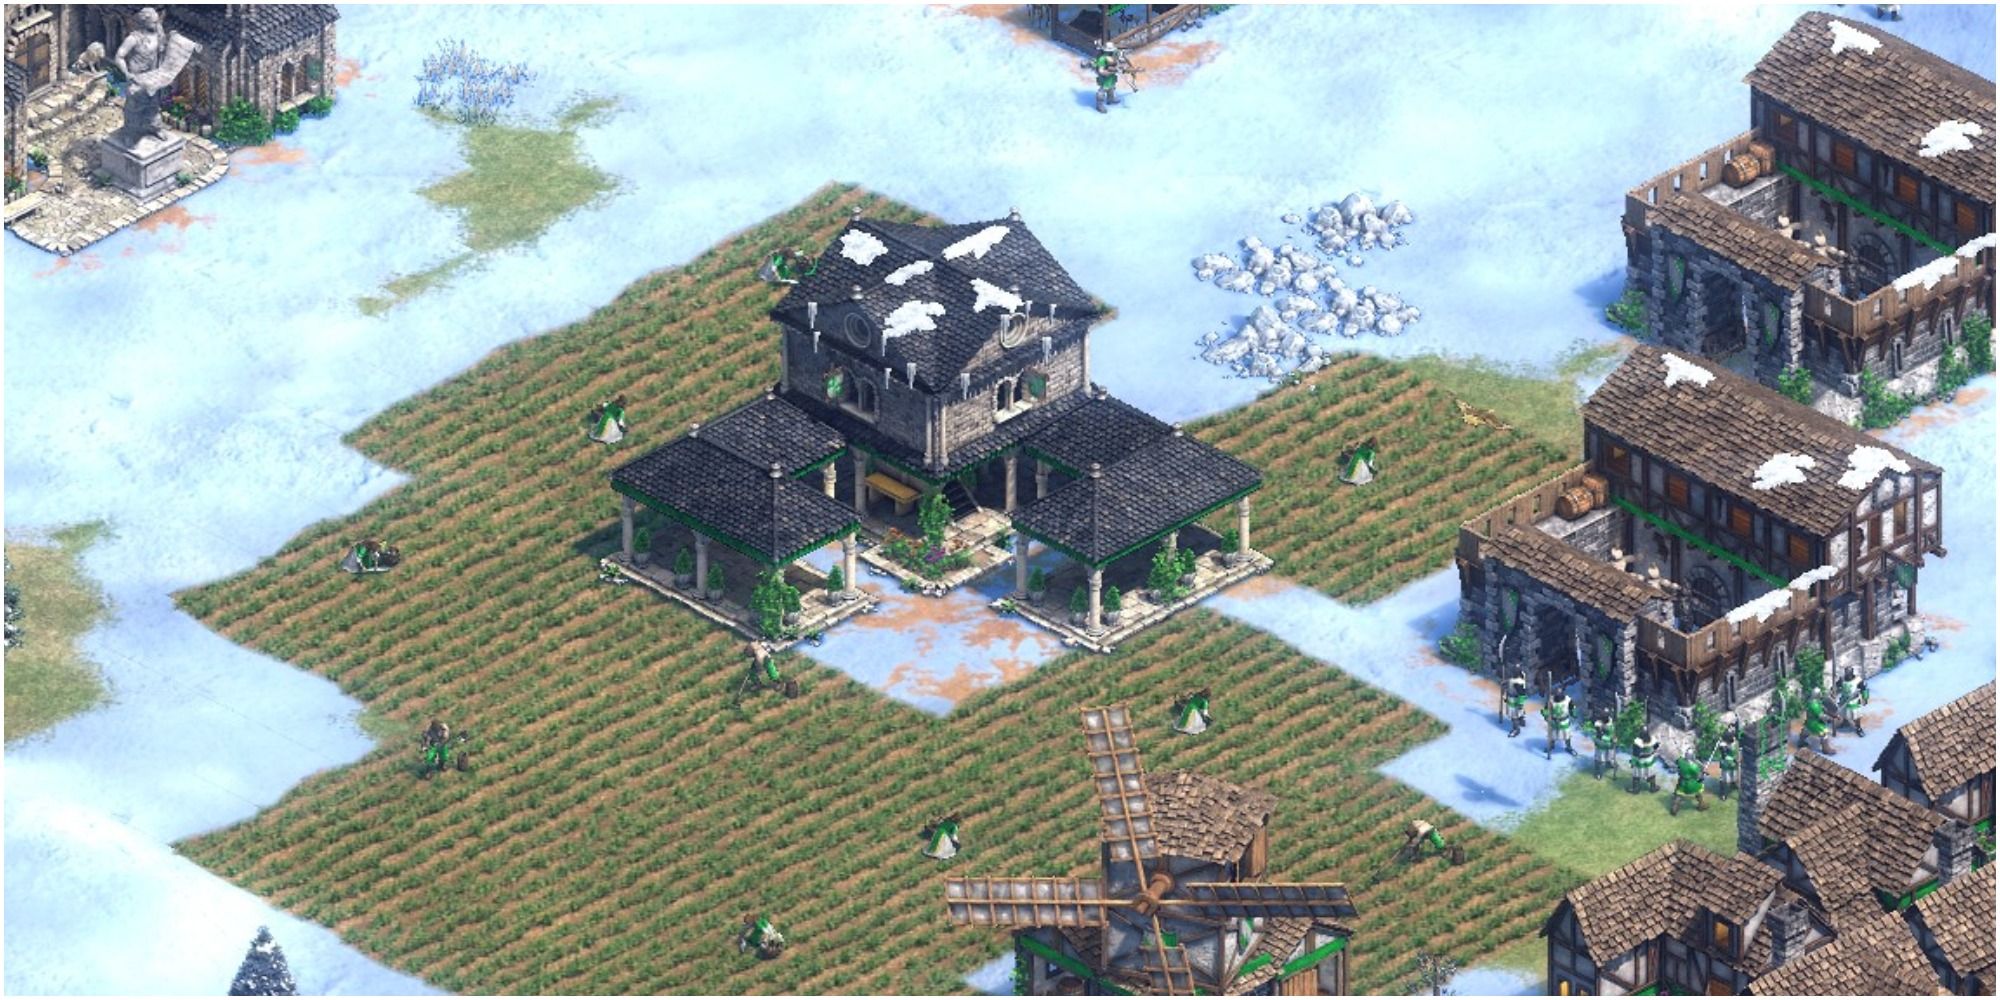 Age of Empires 2 Town Center In Snow with many farms